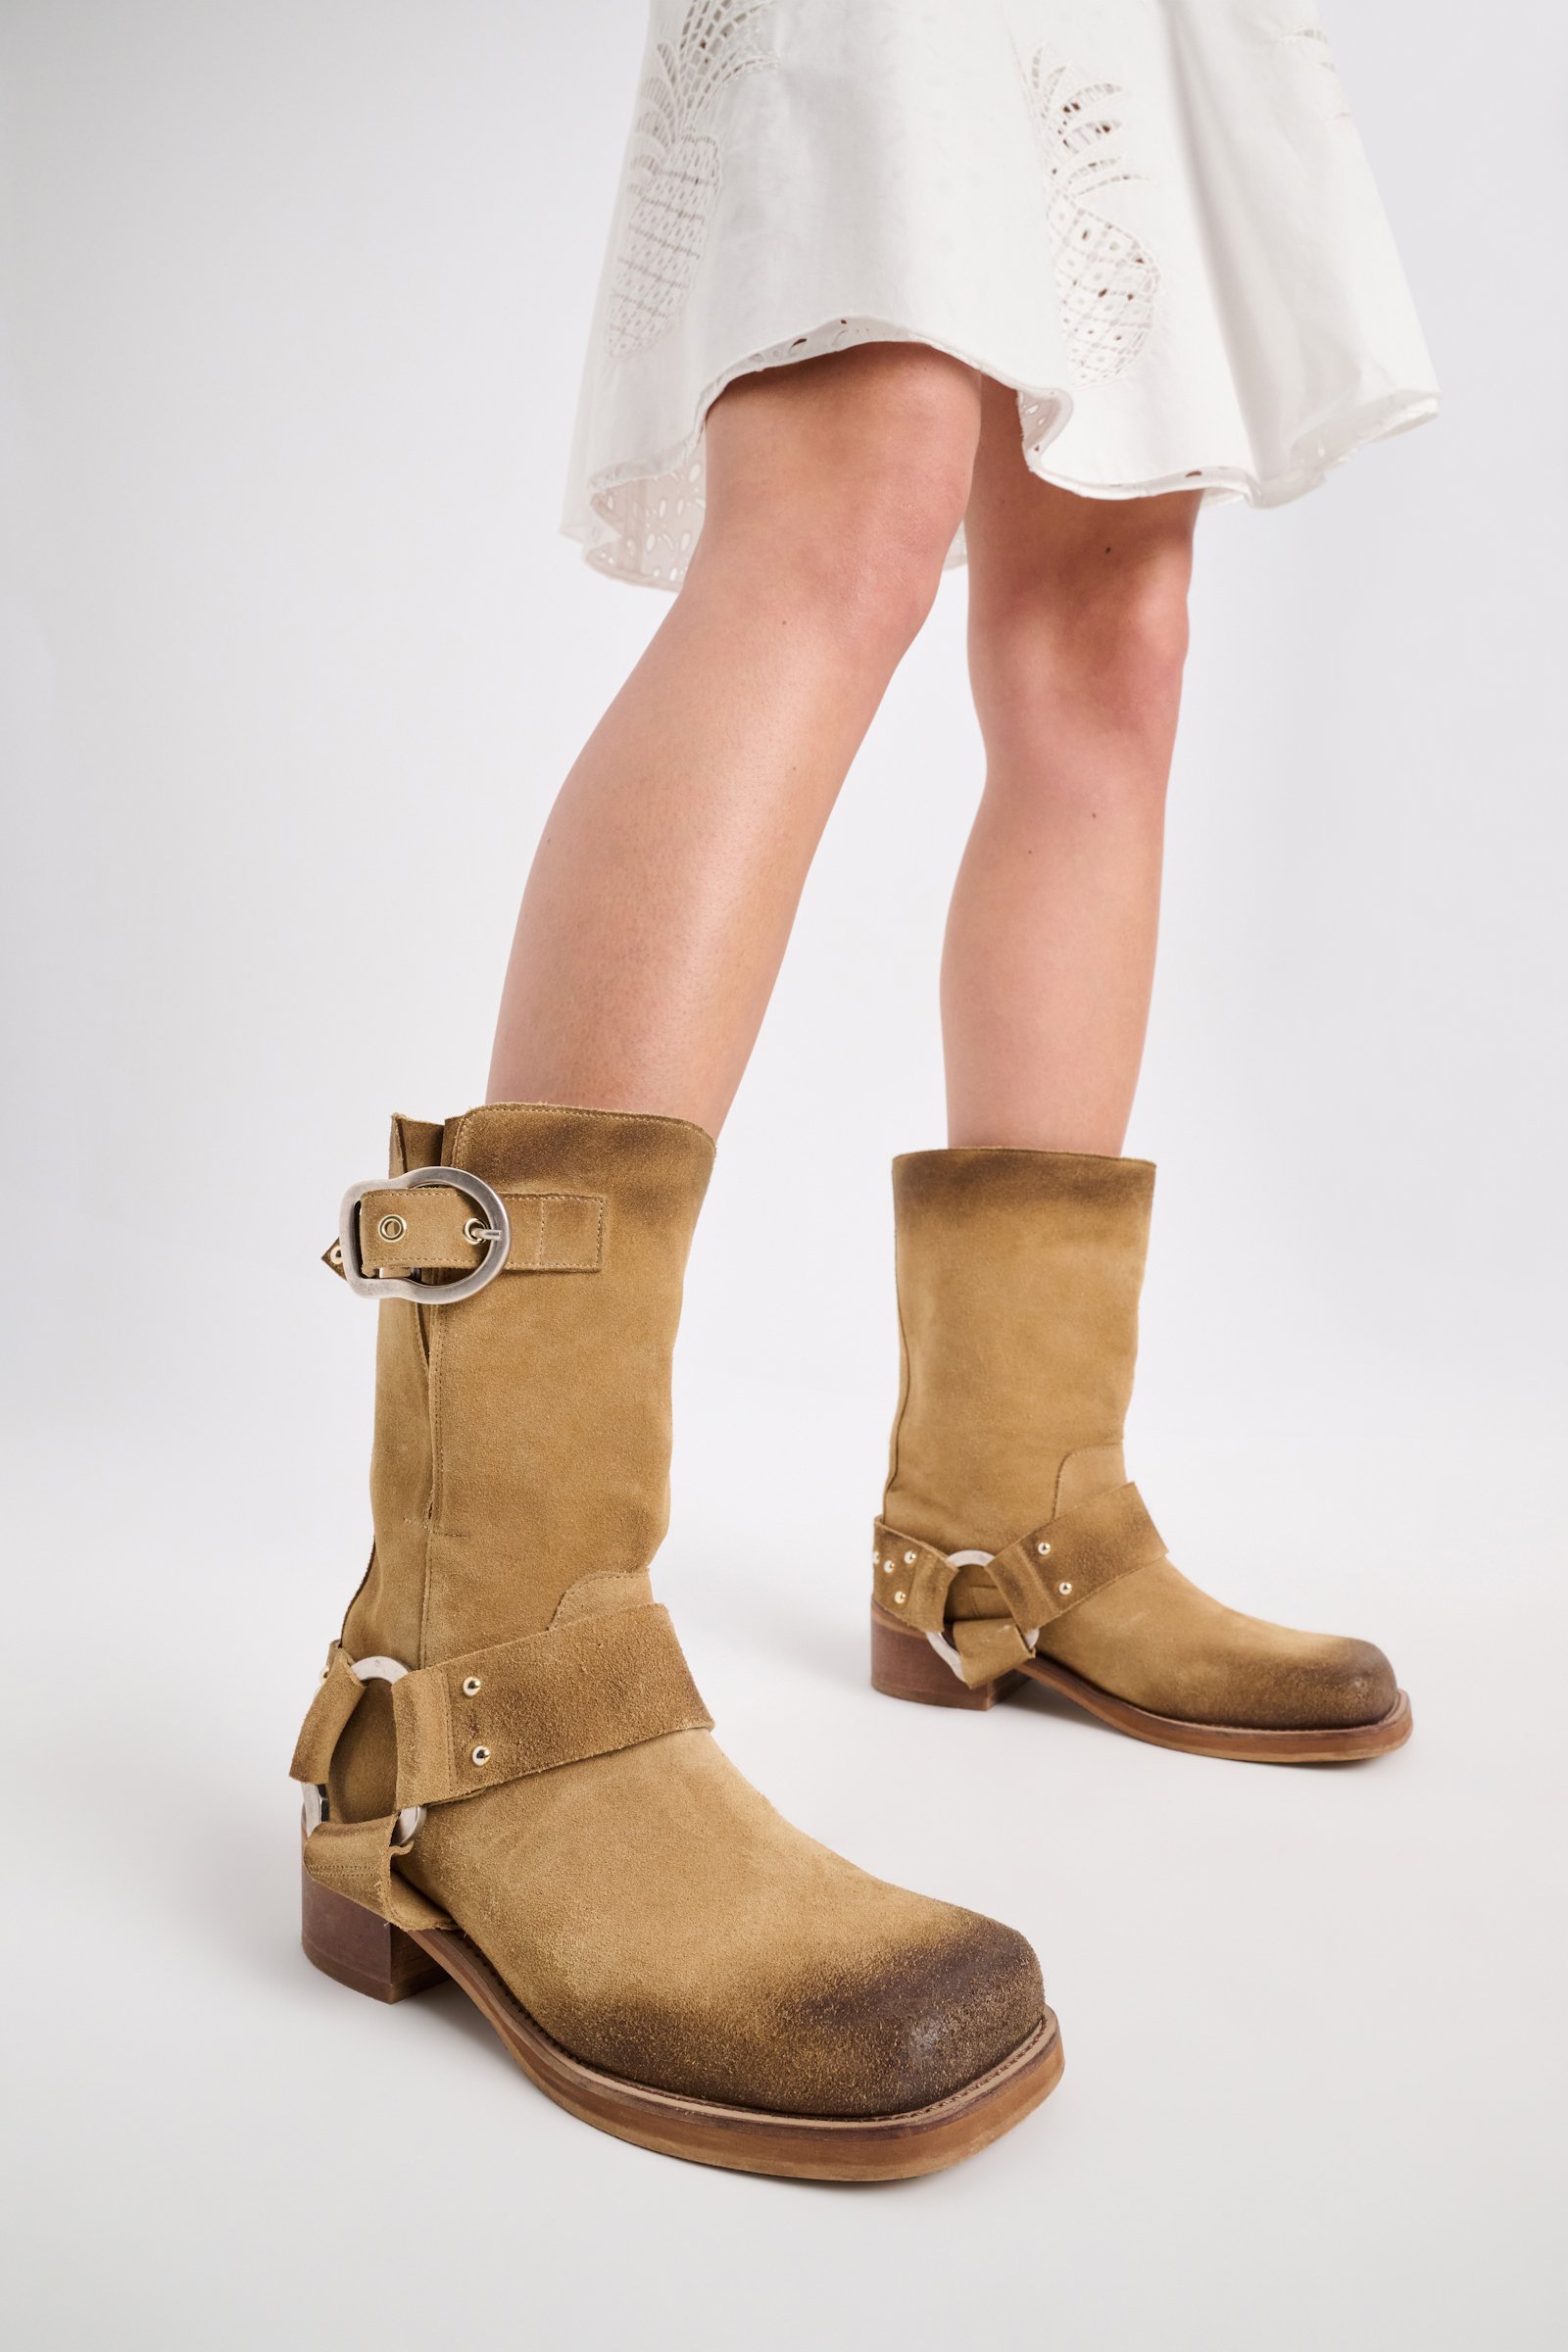 Dorothee Schumacher Waxed suede square toe biker boots camel